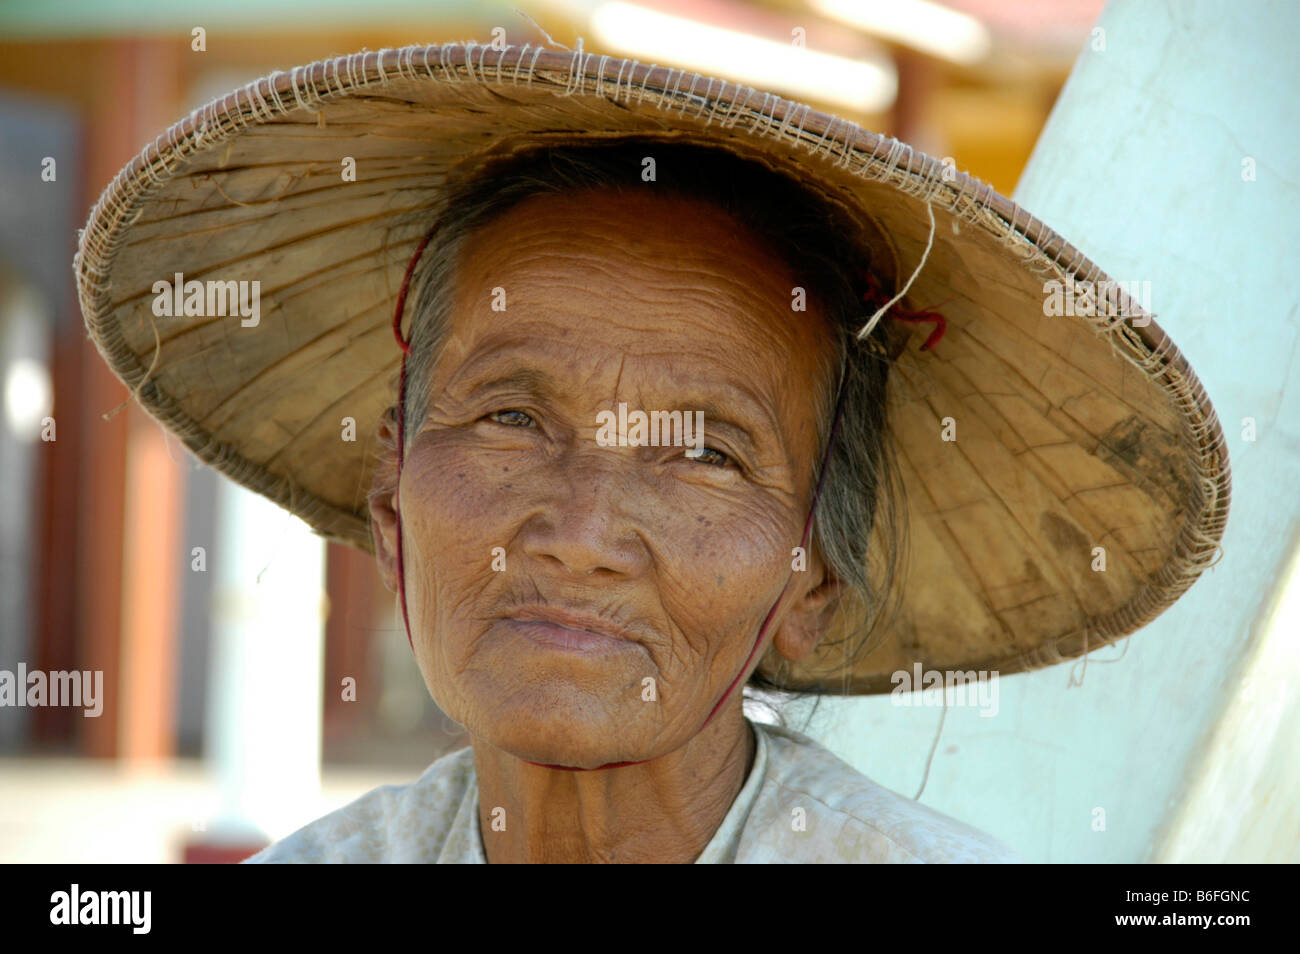 Old woman wearing a hat made of rice straw, portrait, Shan State, Burma, Southeast Asia Stock Photo